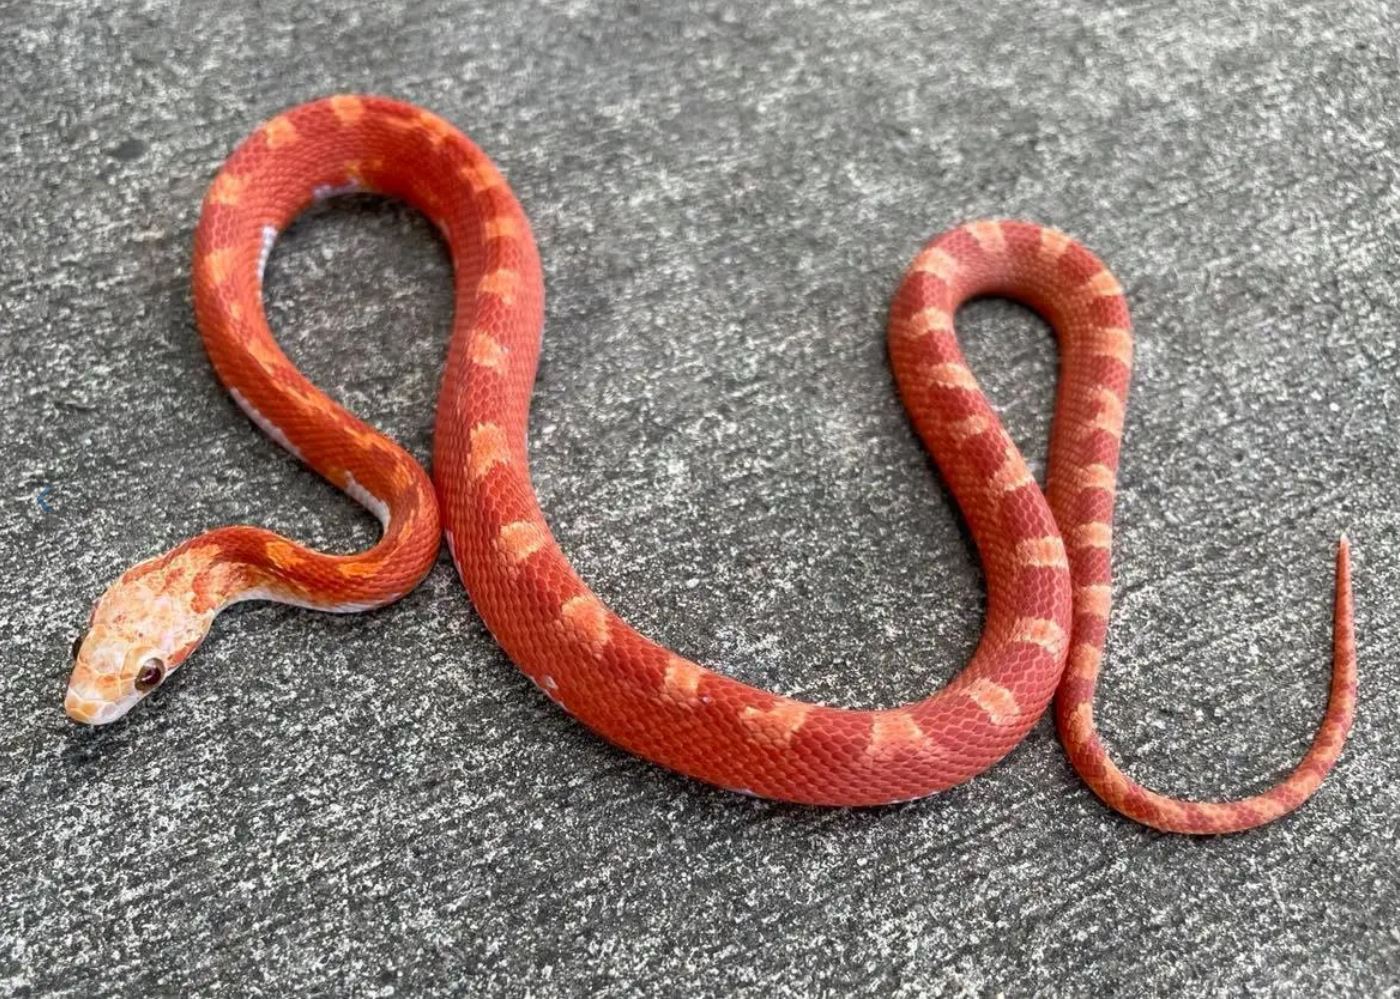 Hypo Pied Sided Bloodred by Snakes at Sunset